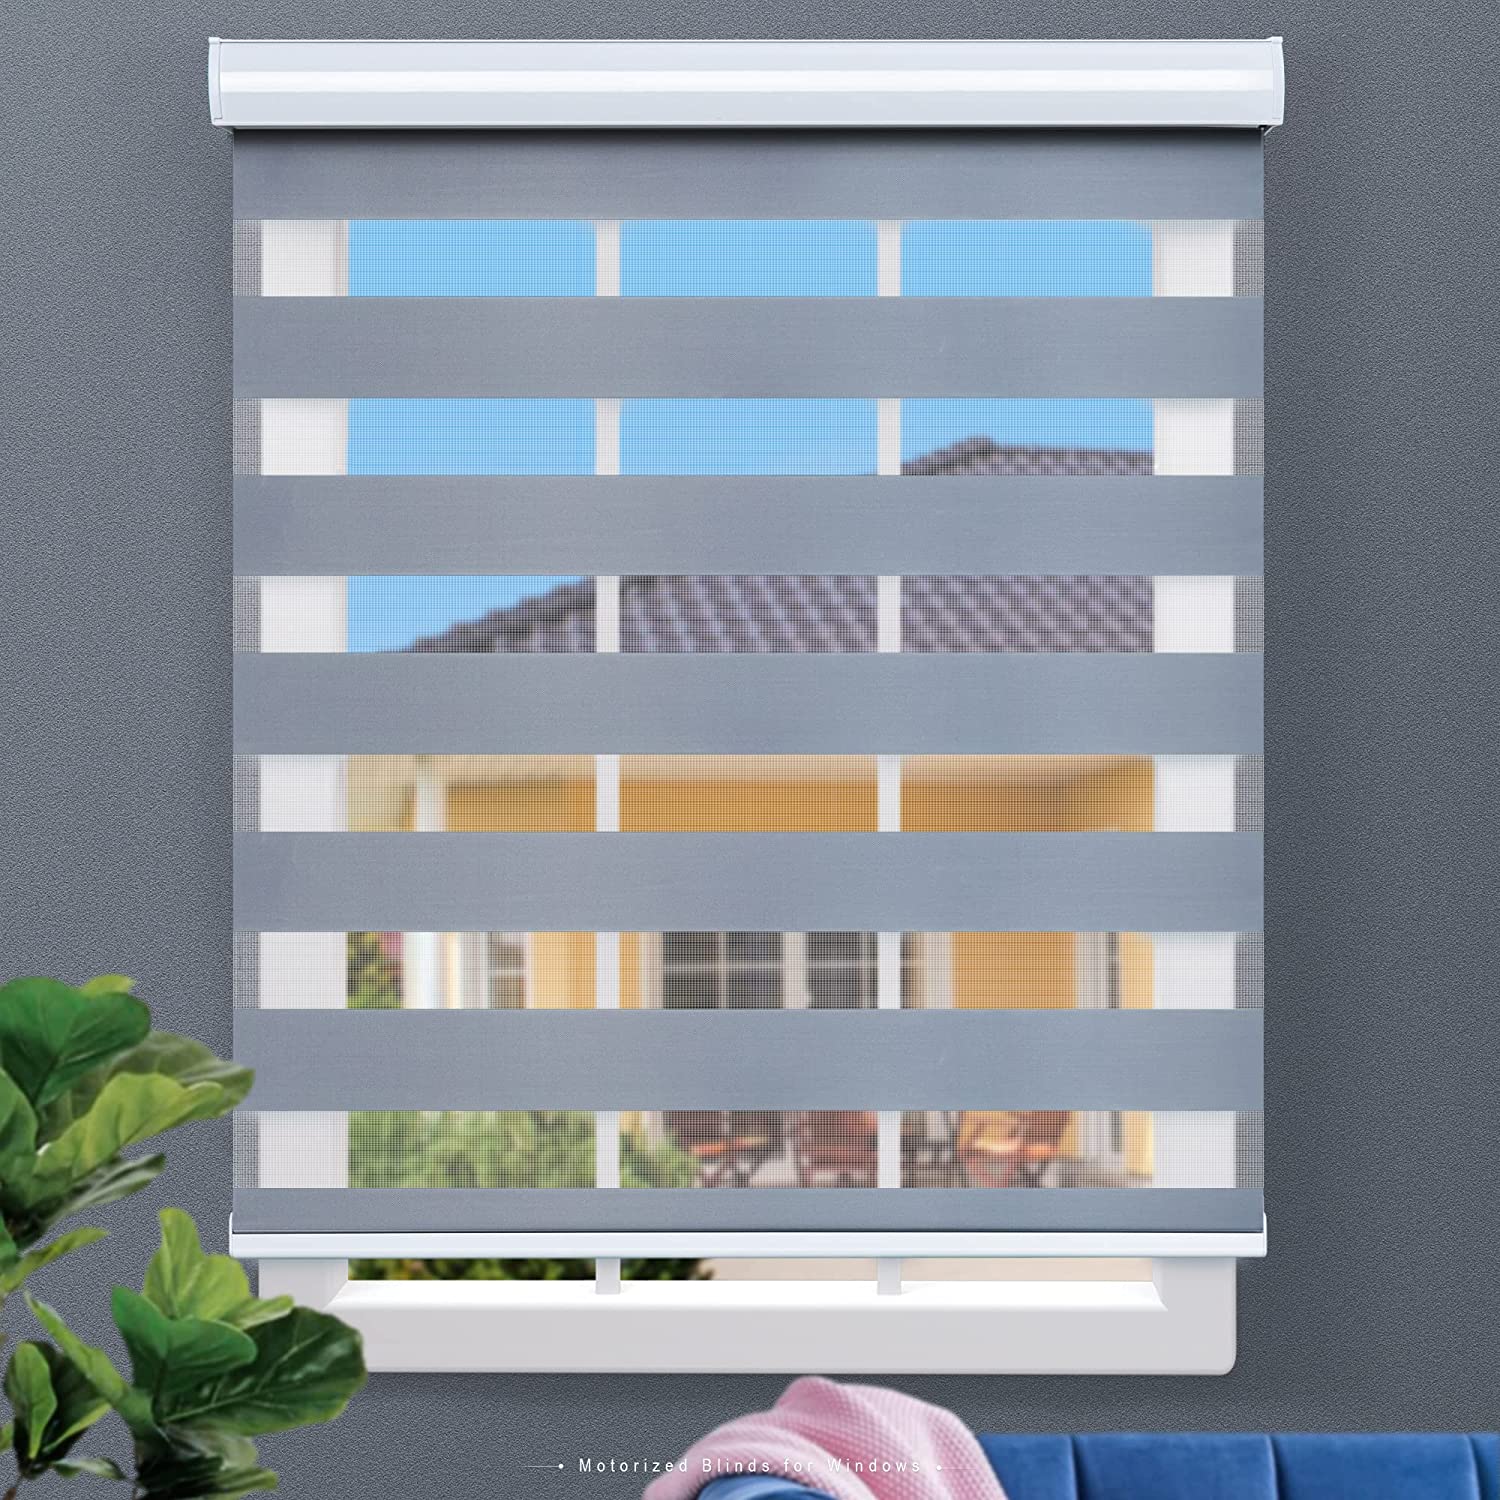 JaeJaes Motorized Zebra Blinds for Windows Shades, Smart Windows Blinds with Remote Control, Compatible with Alexa and Privacy Light Filtering, White, White, 30